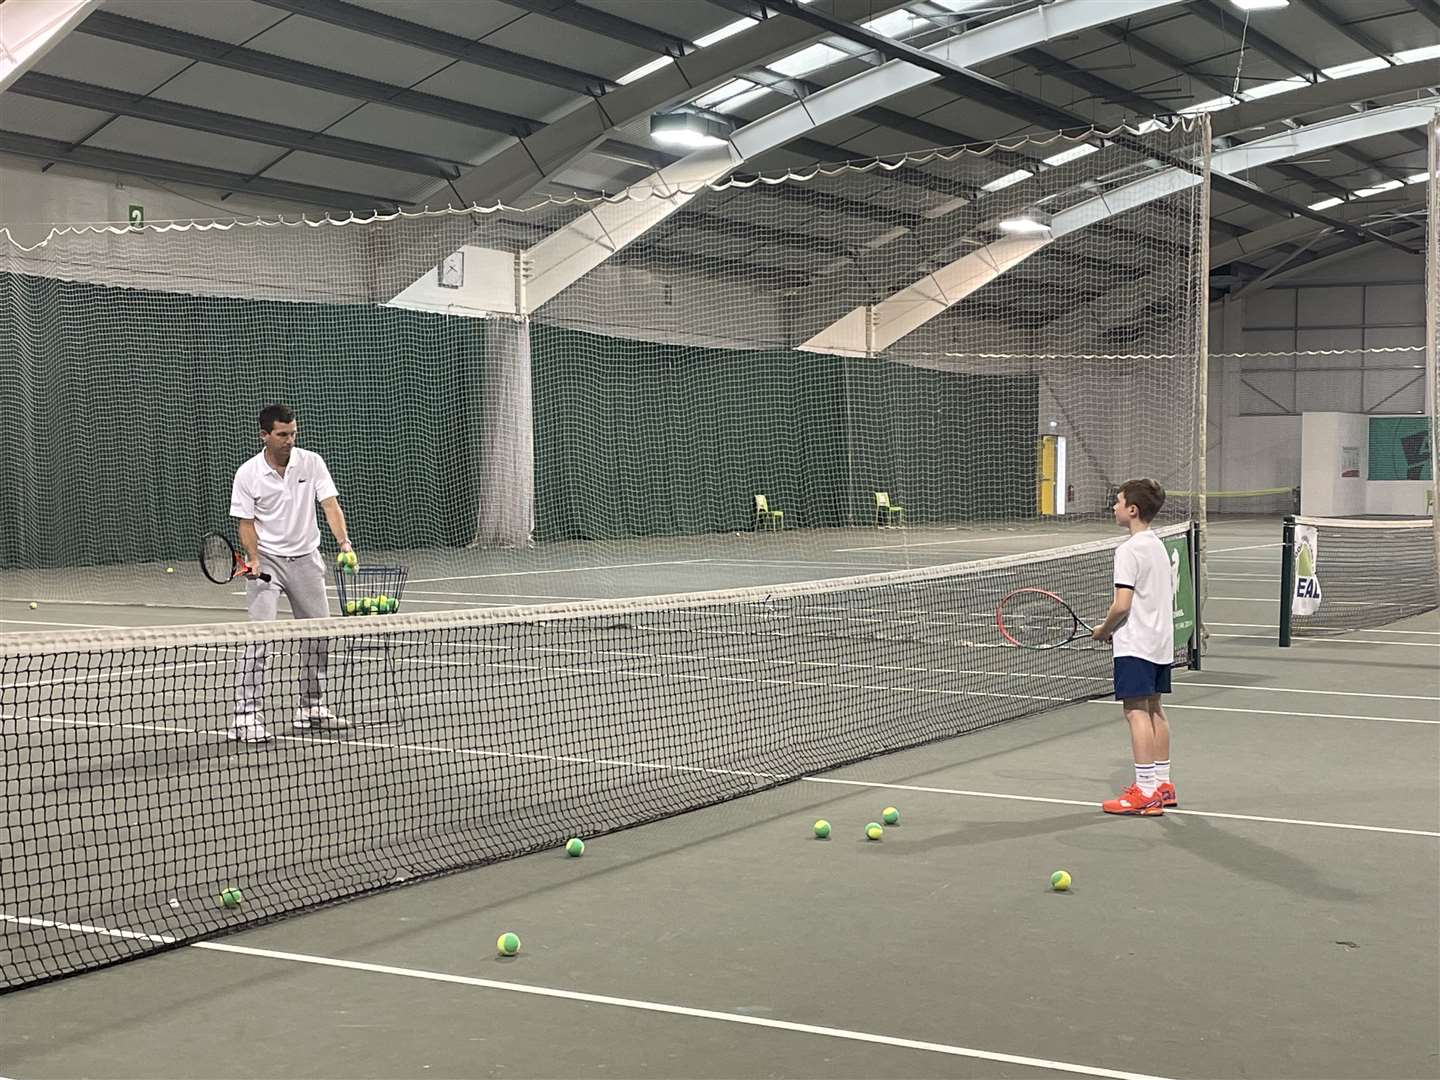 The tennis lesson at Deal Indoor Tennis Centre ended with a short game